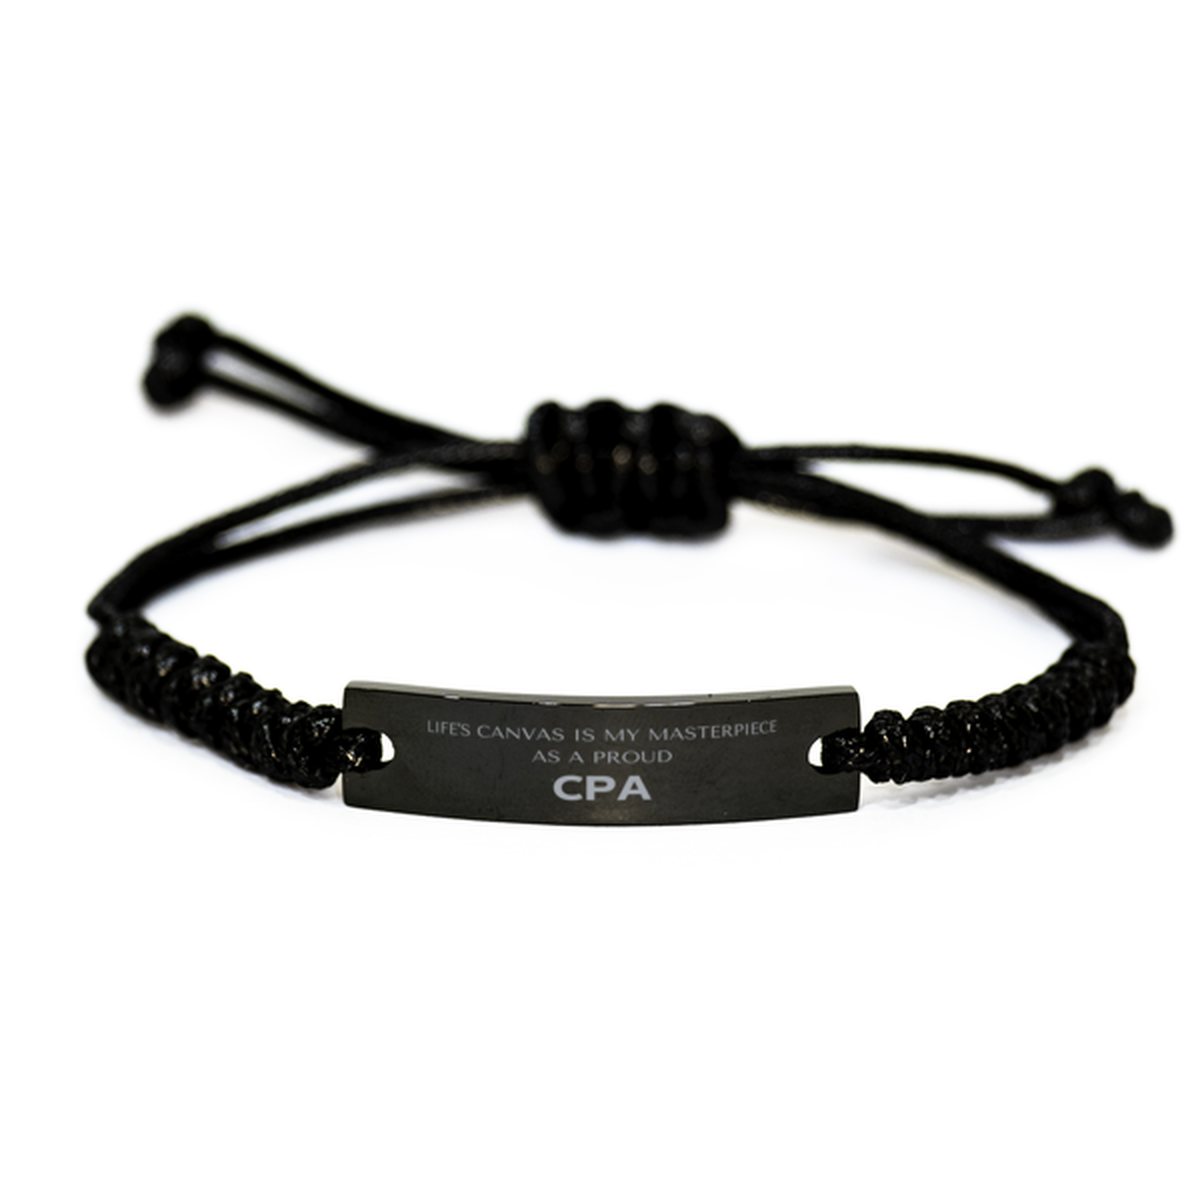 Proud CPA Gifts, Life's canvas is my masterpiece, Epic Birthday Christmas Unique Black Rope Bracelet For CPA, Coworkers, Men, Women, Friends